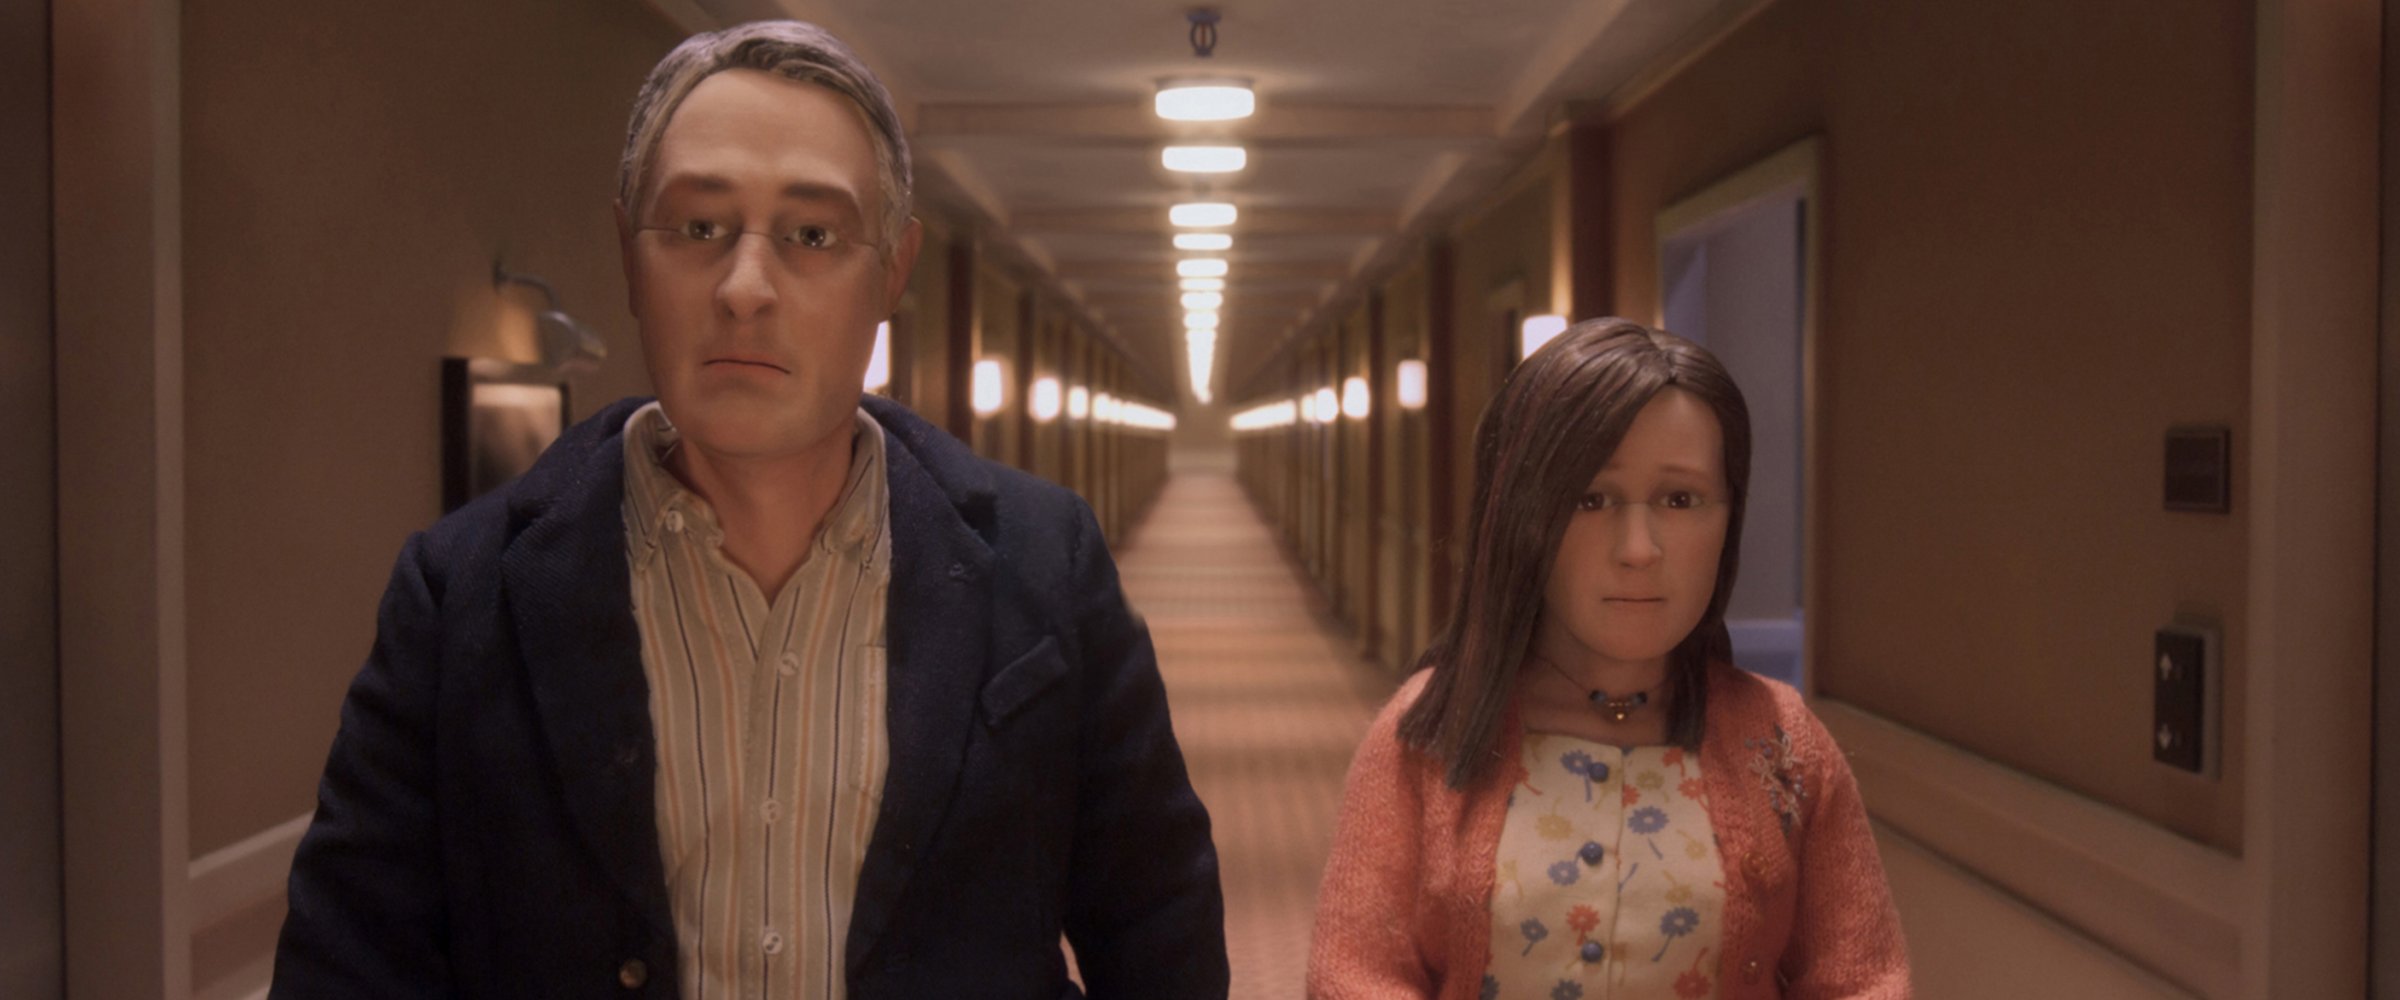 David Thewlis voices Michael Stone and Jennifer Jason Leigh voices Lisa in Anomalisa.